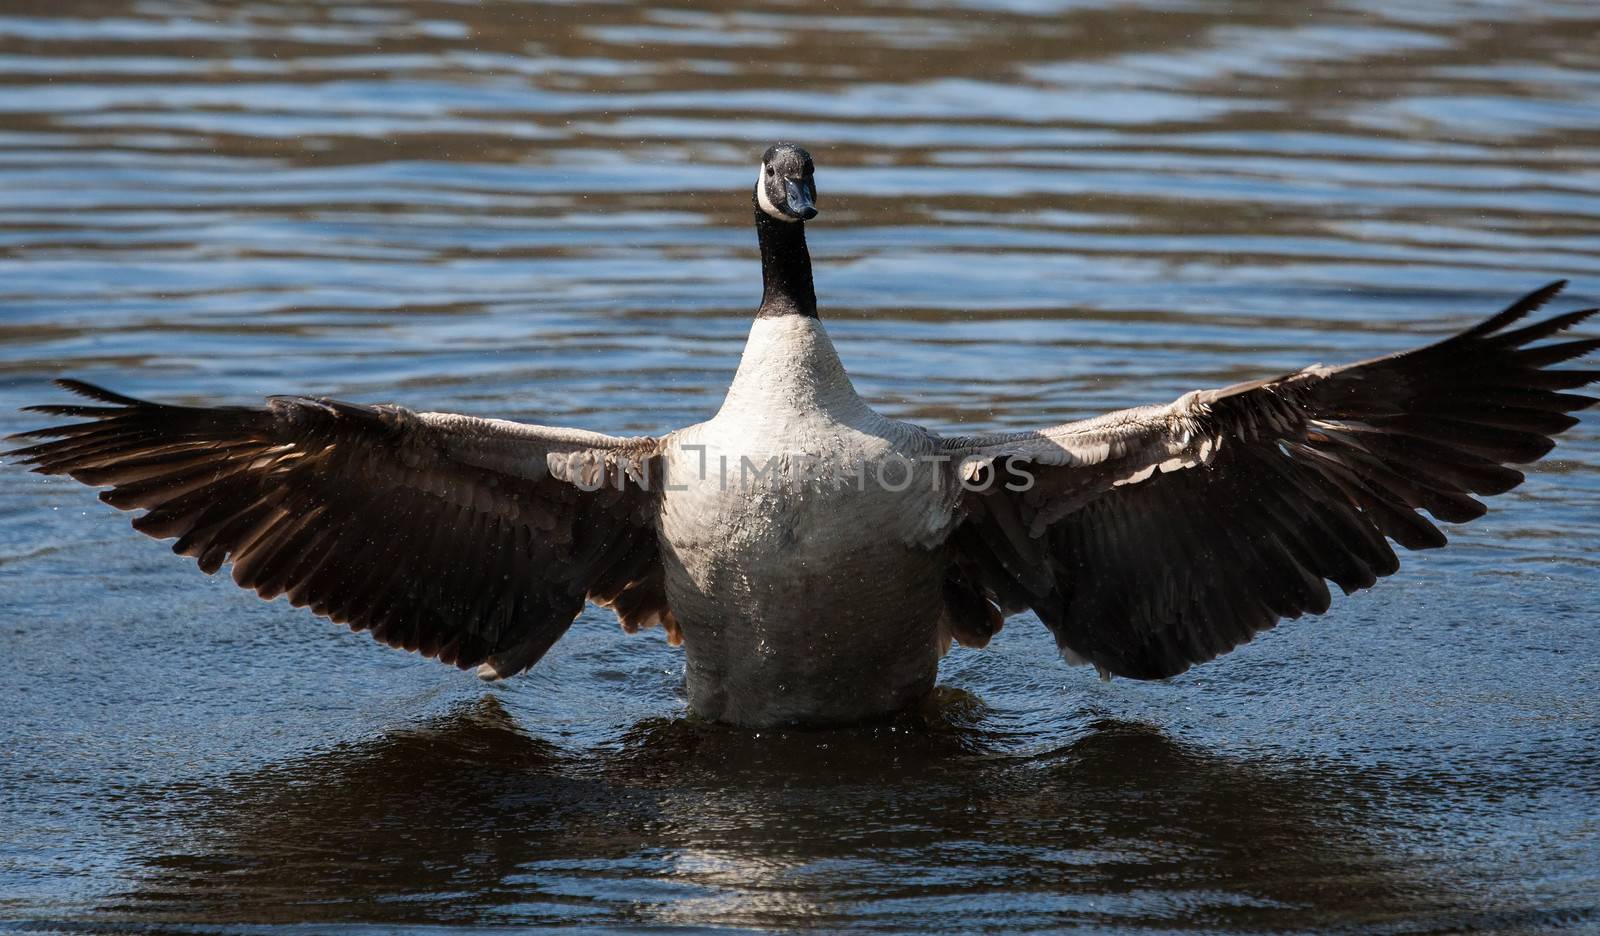 Canadian Goose flapping wings in the water